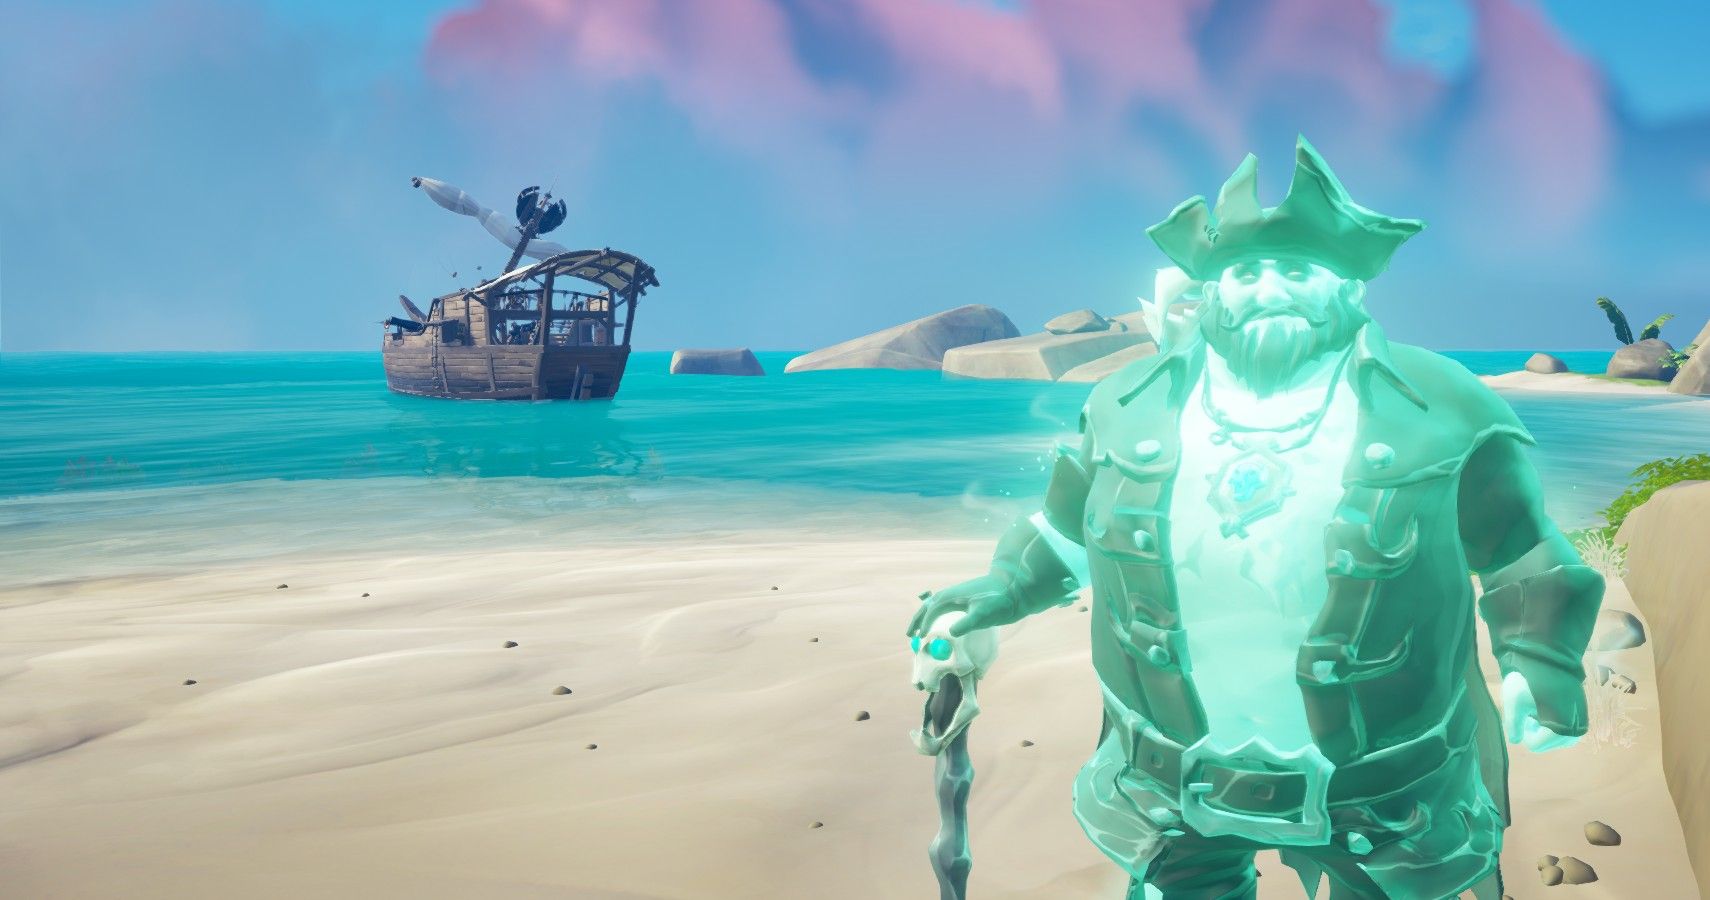 The Pirate Lord on the Maiden Voyage in Sea of Thieves